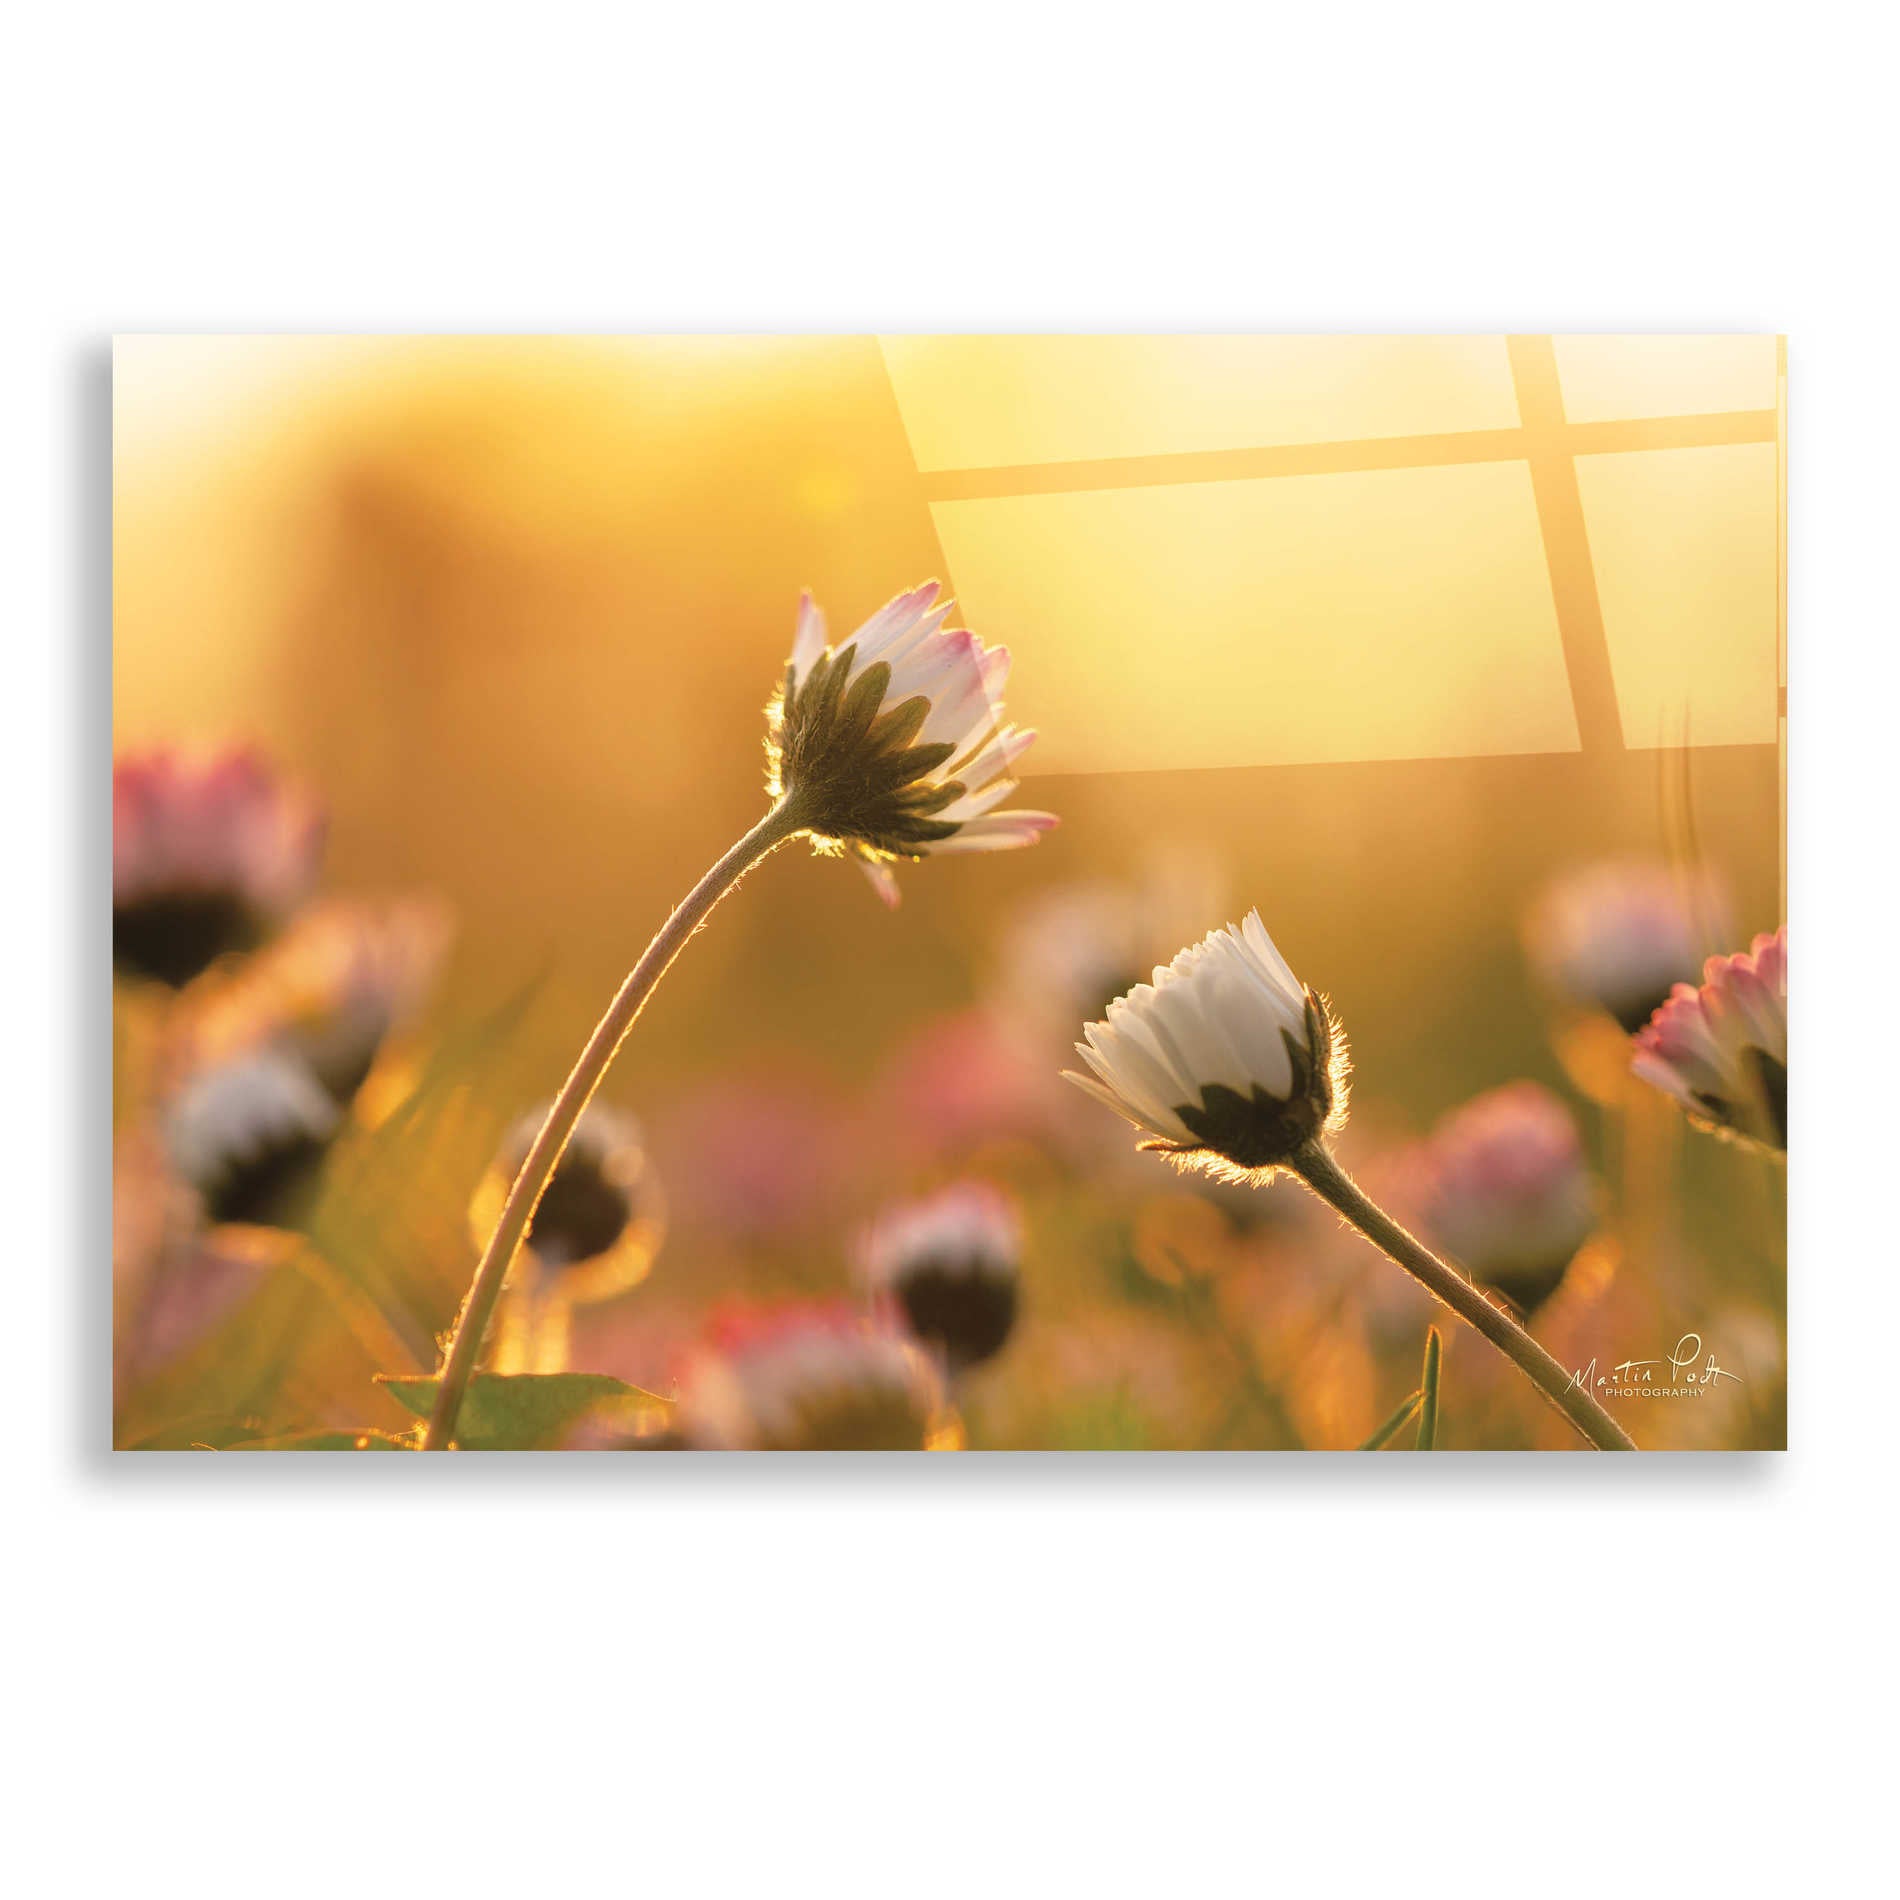 Epic Art 'Daisies' by Martin Podt, Acrylic Glass Wall Art,24x16